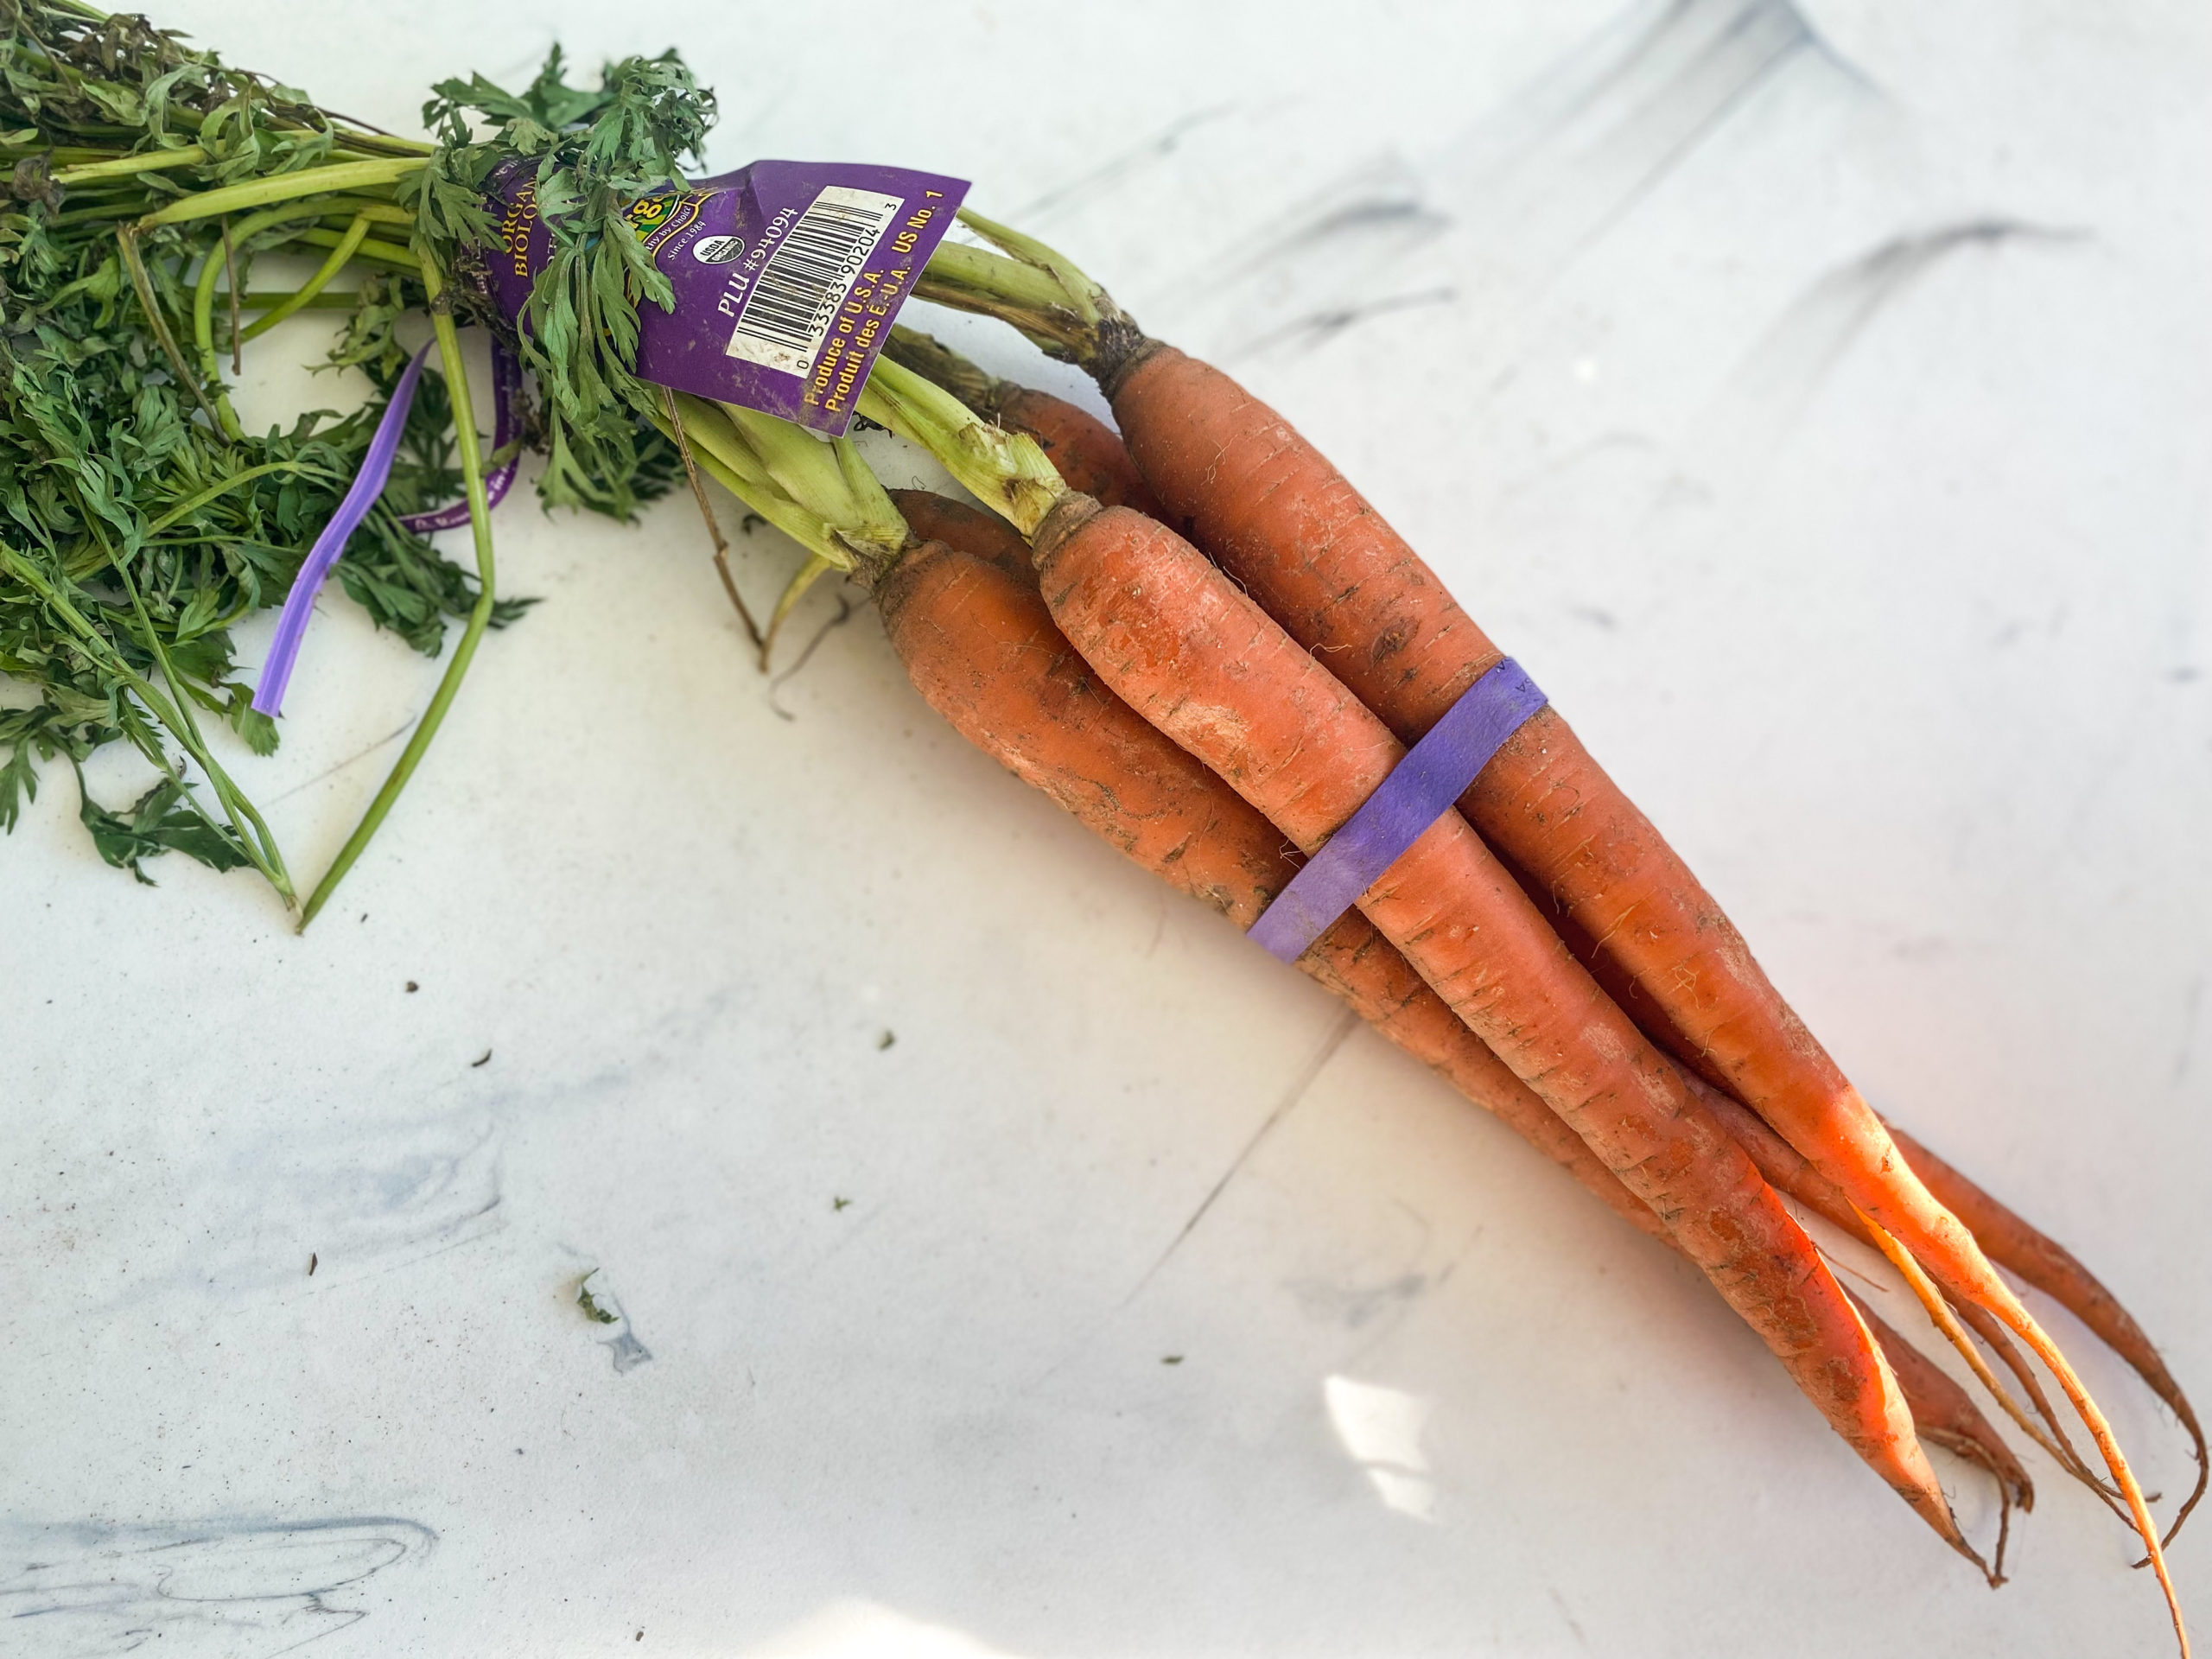 Bunch of whole organic carrots from Rollin' Oats